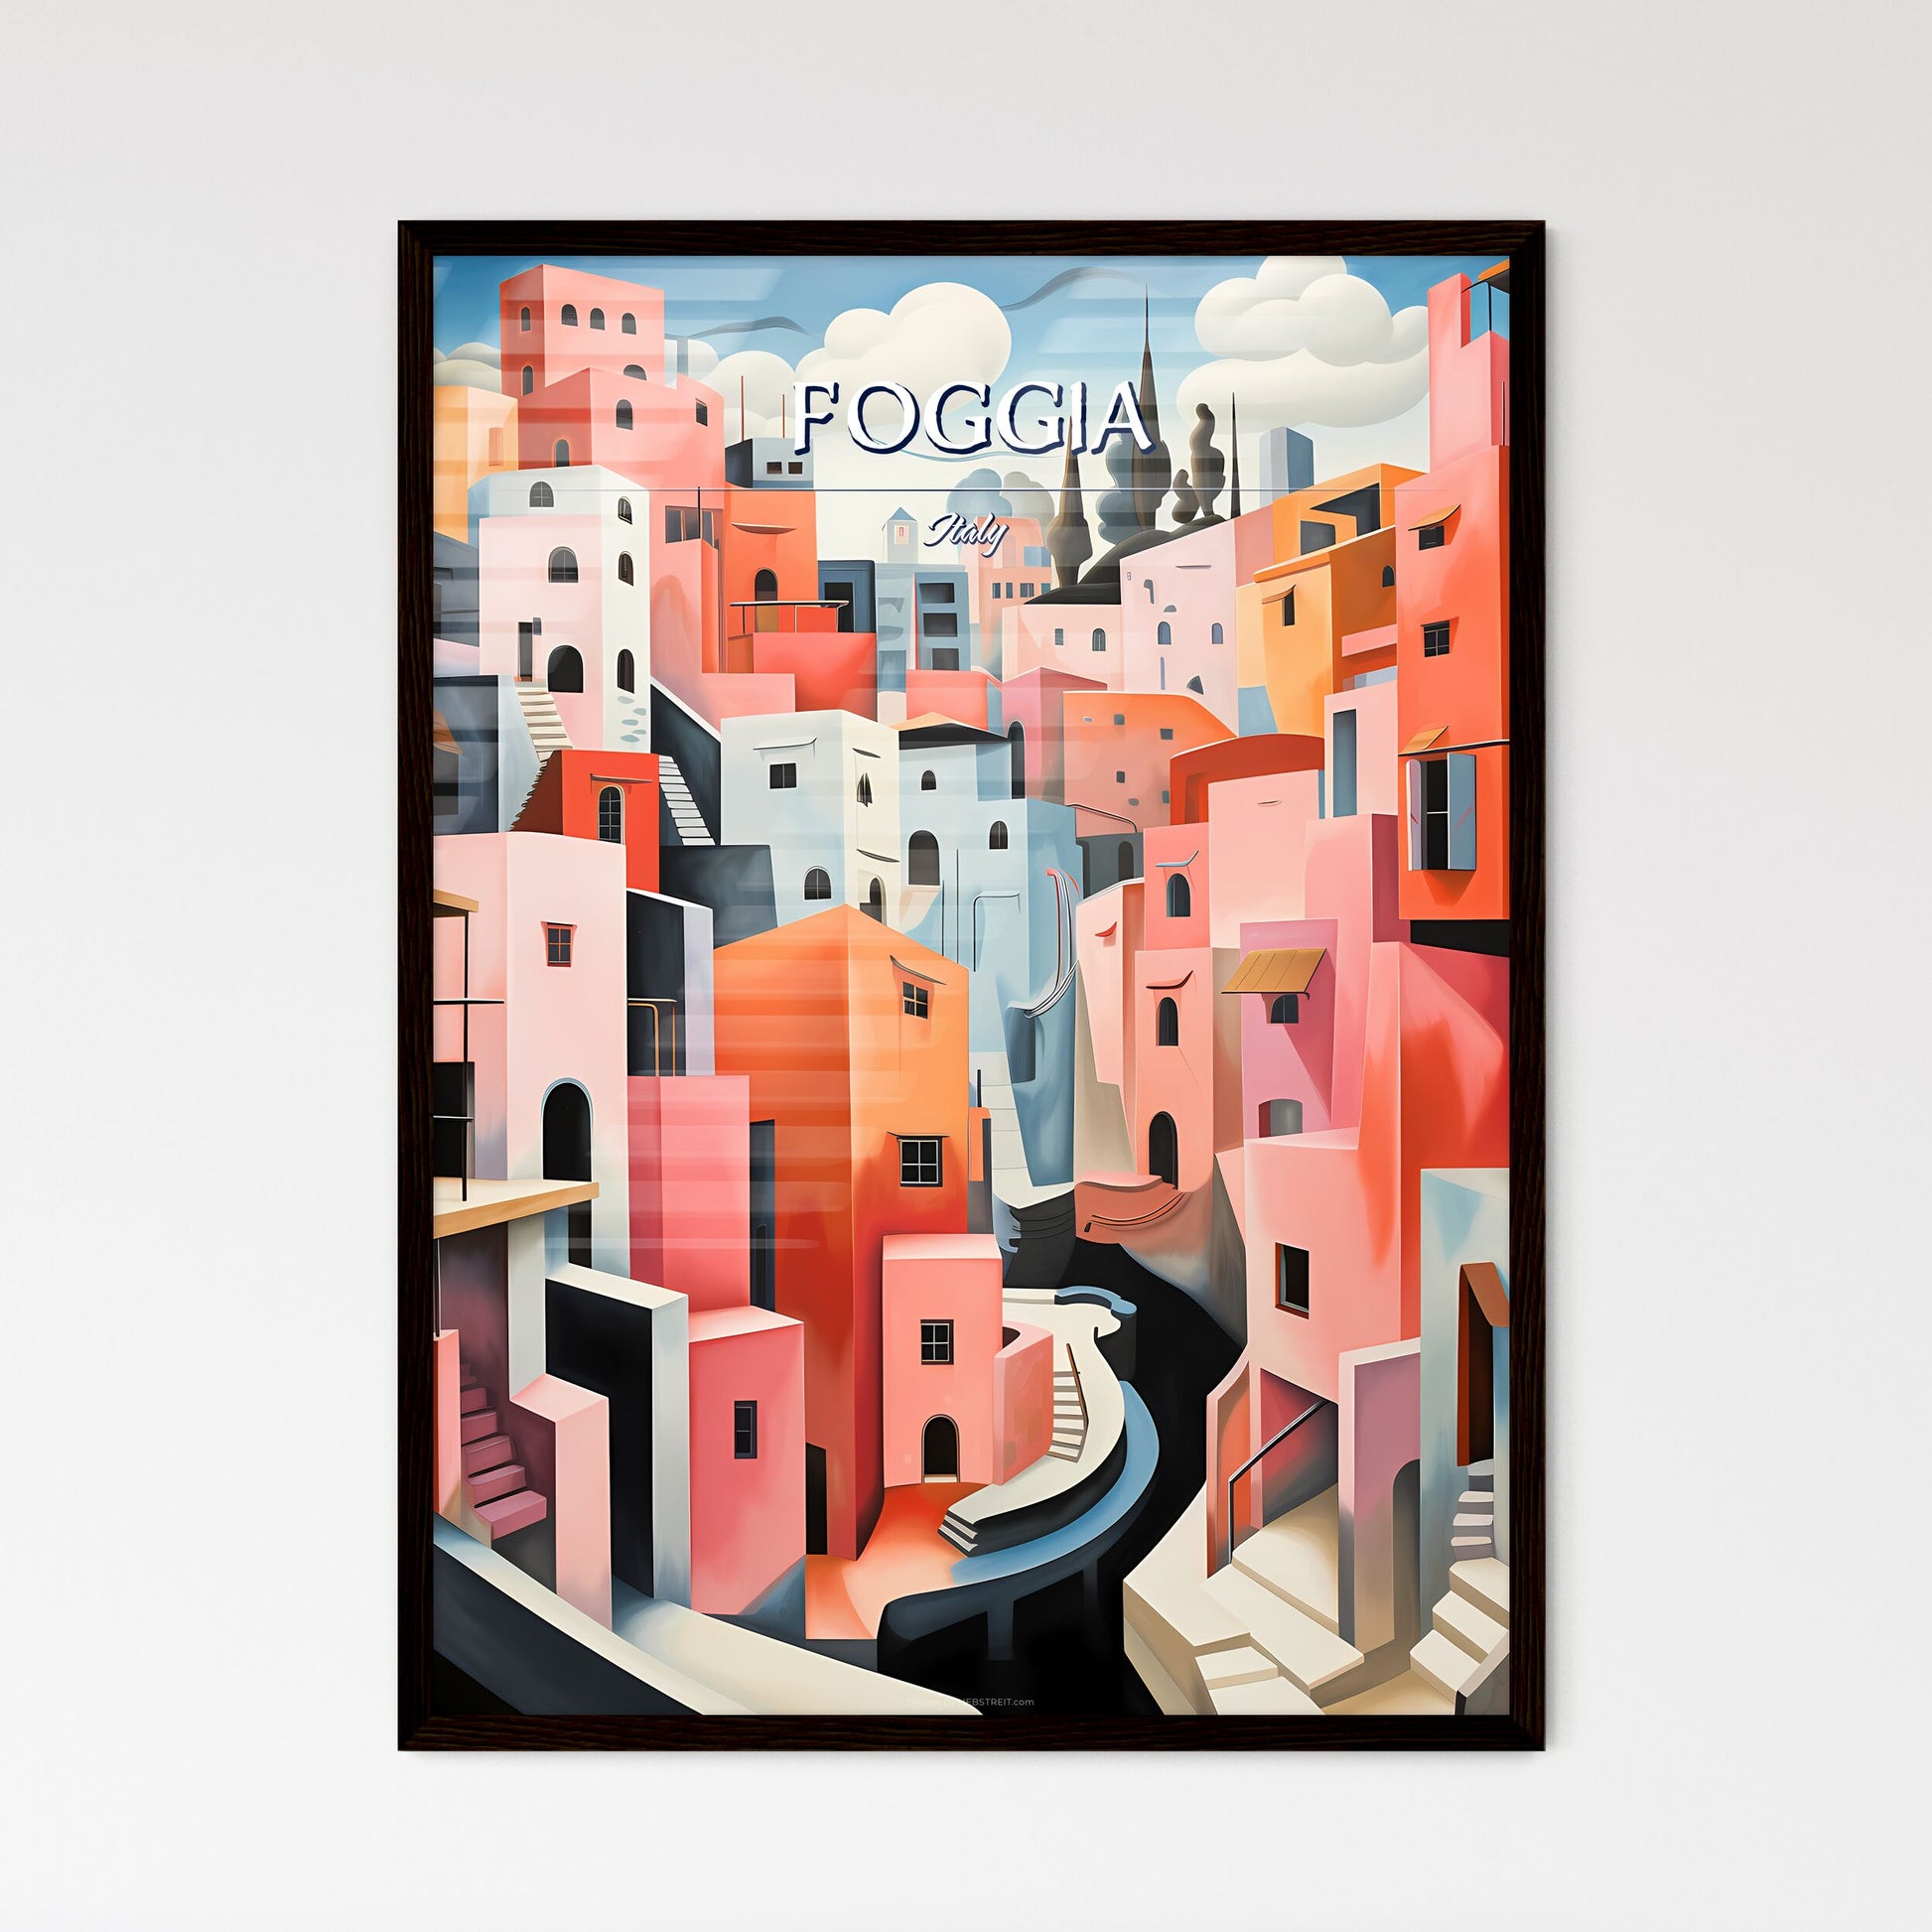 Foggia, Italy - Art print of a painting of a colorful city Default Title